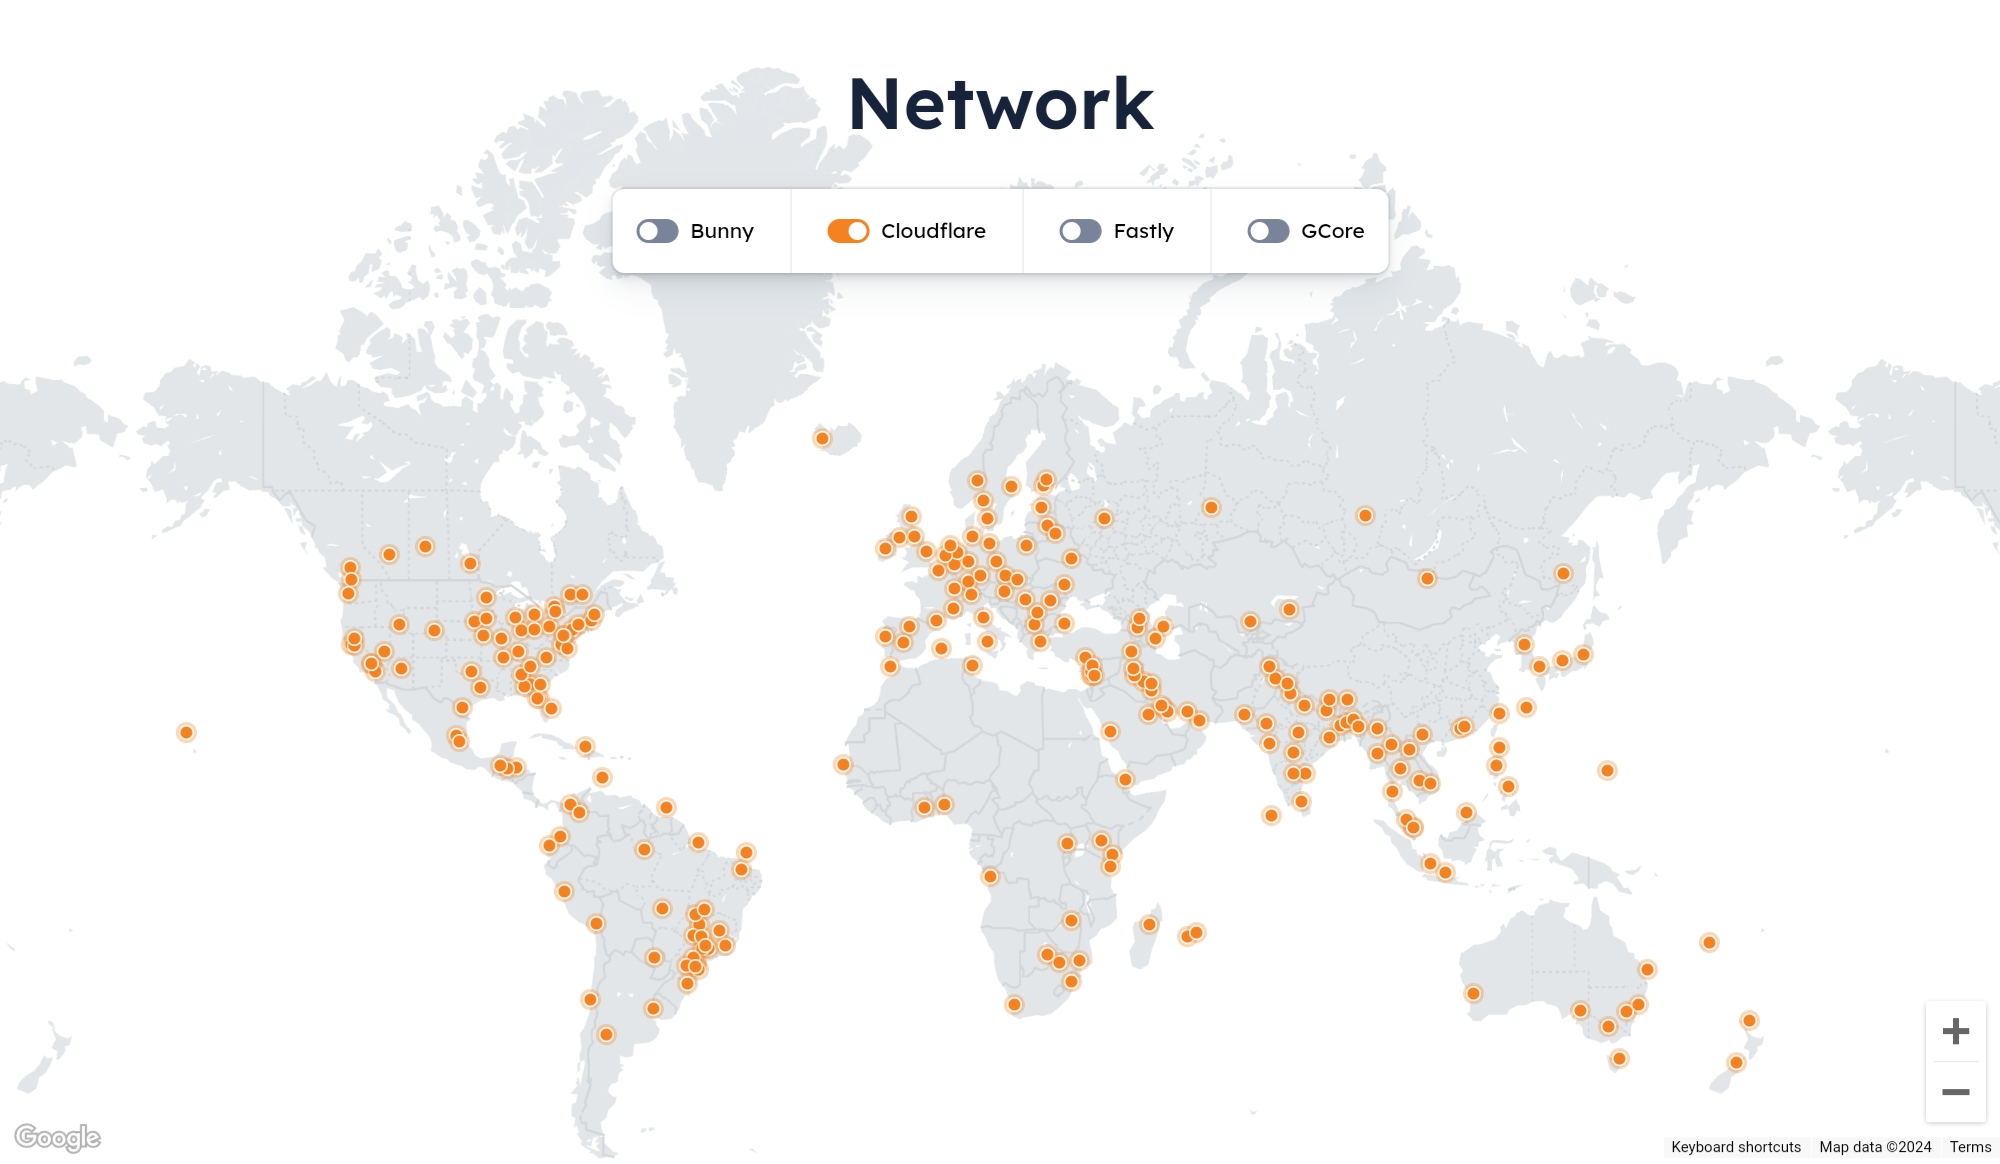 An image showing all 300+ edge PoPs of Cloudflare and their locations